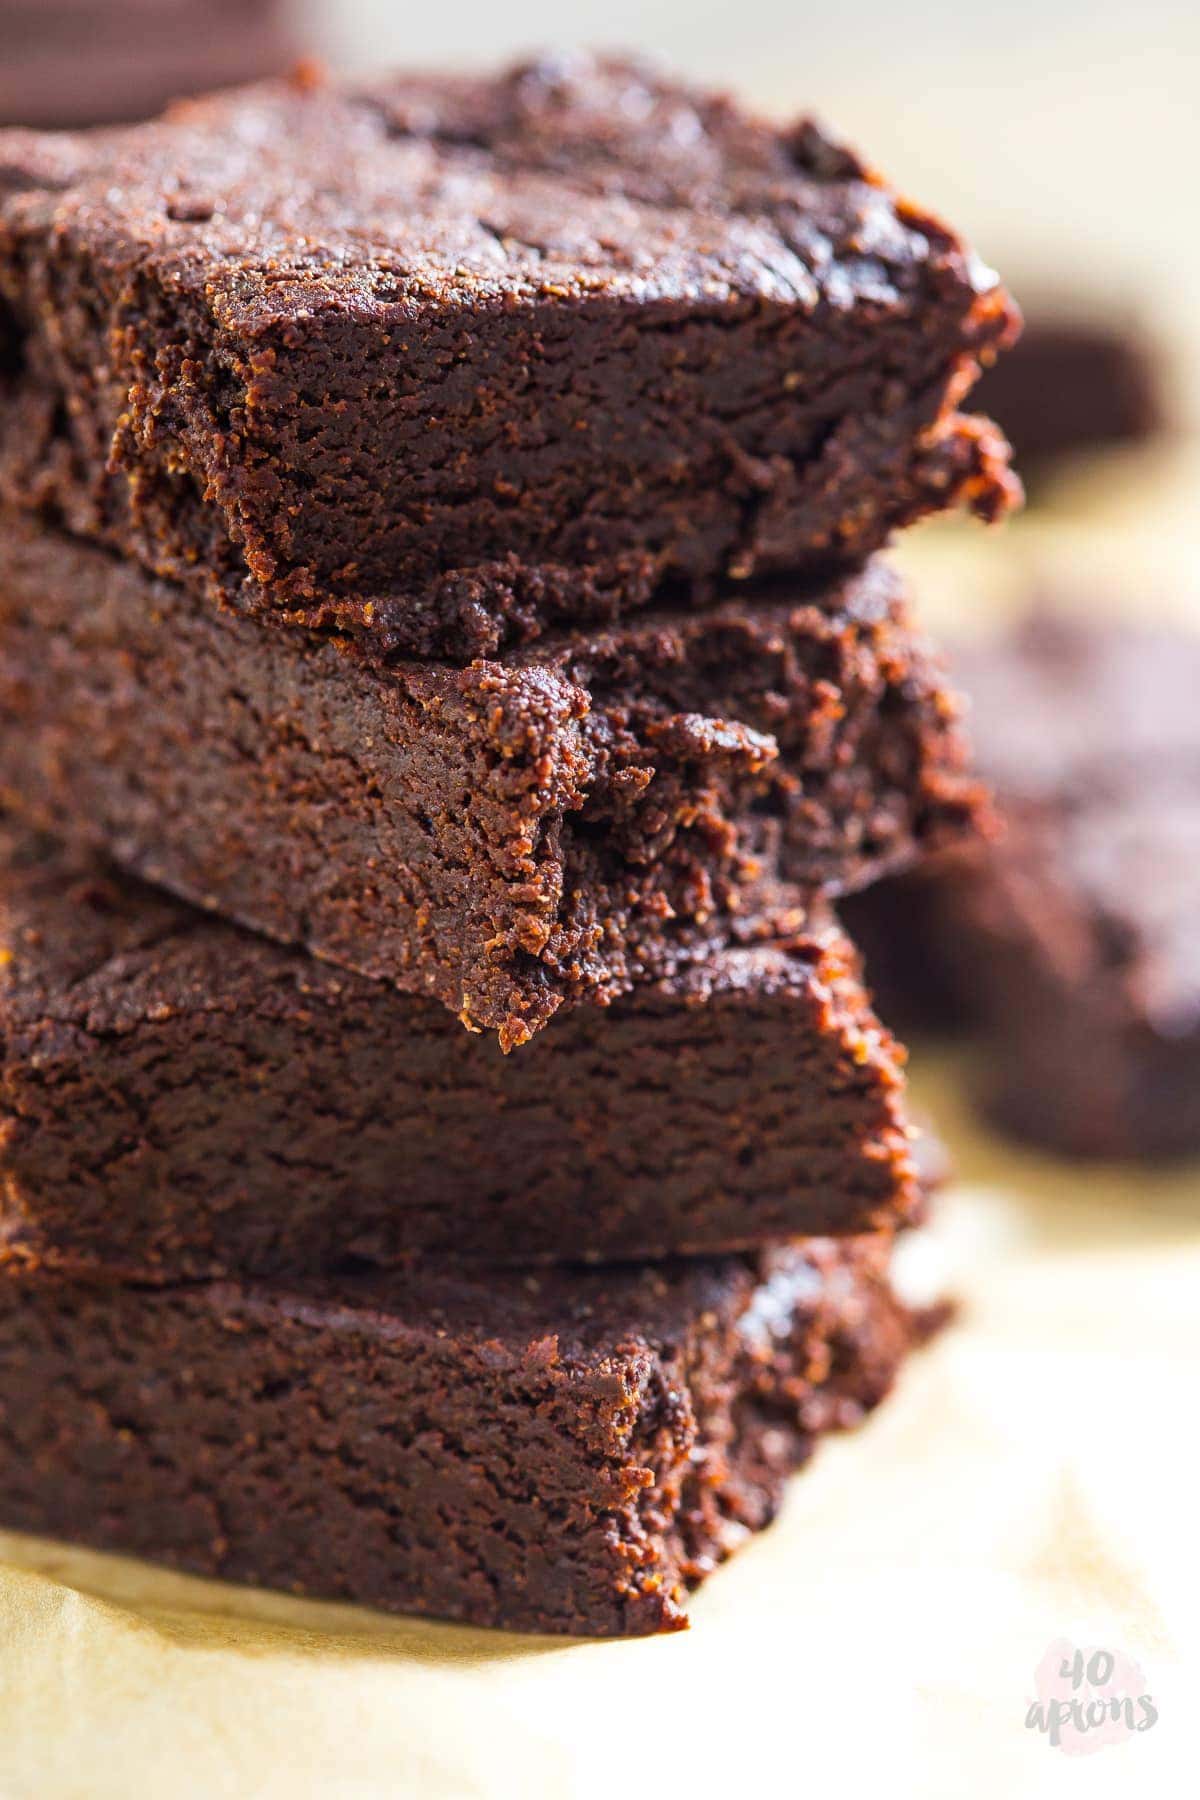 Healthy fudgy brownies - rich, fudgy, dense, and chewy, but with no refined sugar or flour! Everything is awesome! // 40 Aprons